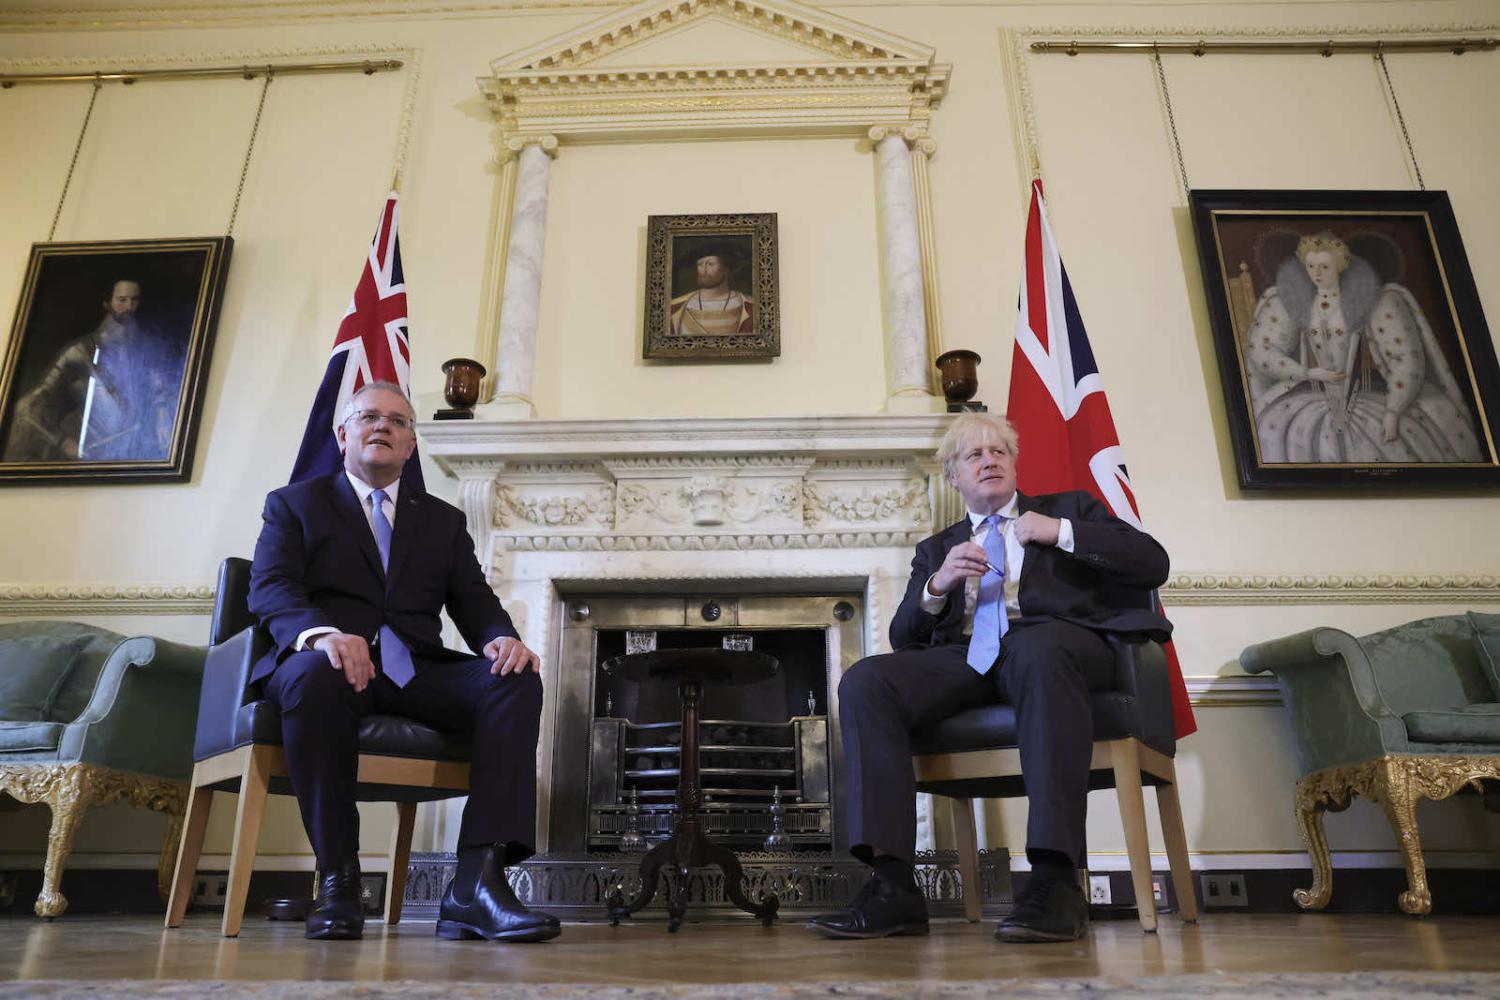 Australia’s Prime Minister Scott Morrison meeting with British counterpart Boris Johnson in London this month (Andrew Parsons/No 10 Downing Street/Flickr)